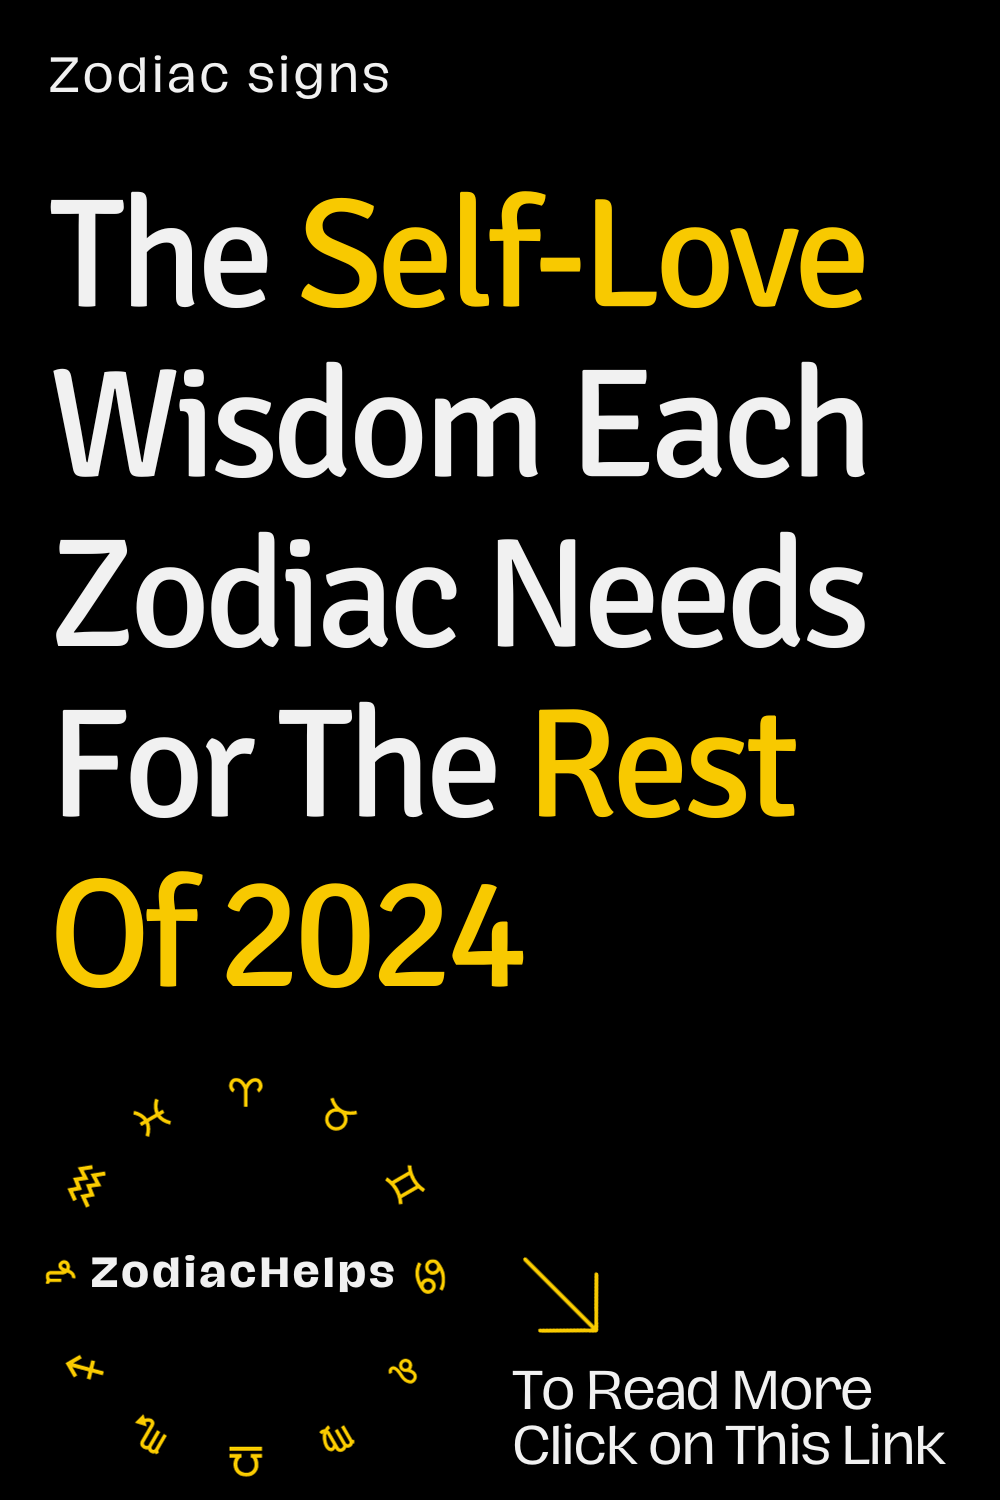 The Self-Love Wisdom Each Zodiac Needs For The Rest Of 2024